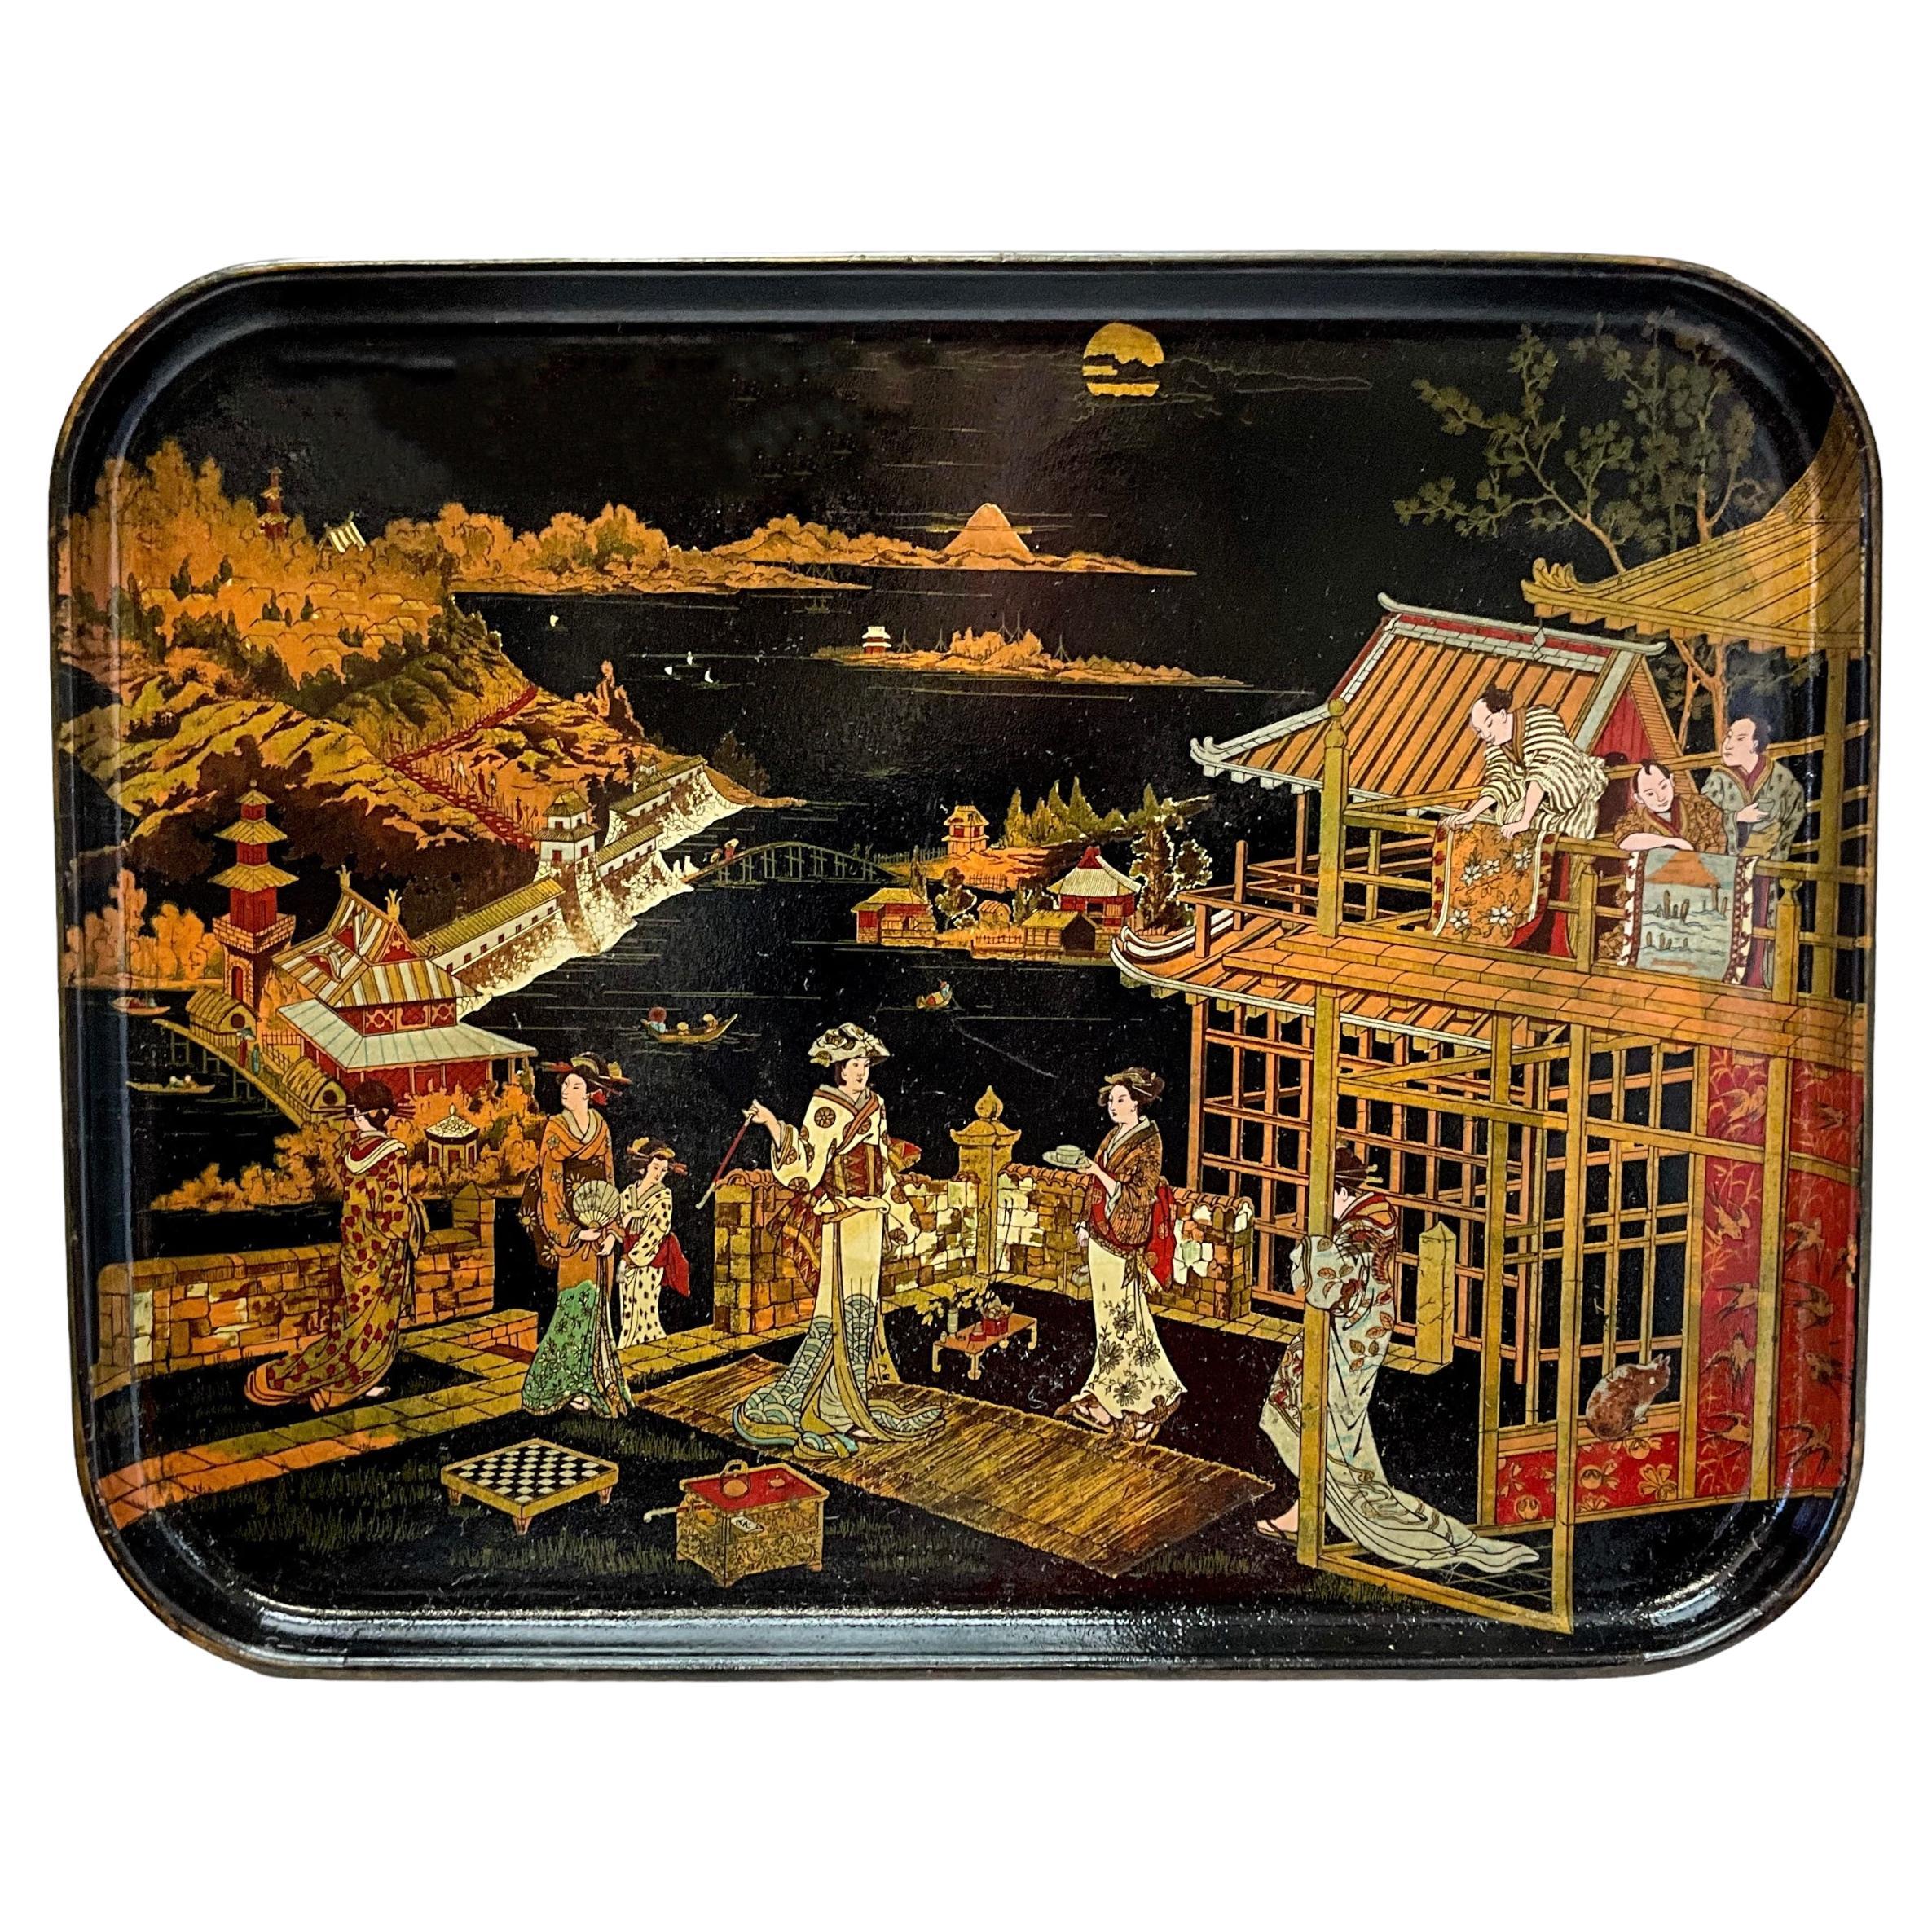 This is a late 19th century English regency black lacquer and gilt chinoiserie papier-mâché tray. The Japanning depicts pastoral and coastal scenes. It is in very good condition,